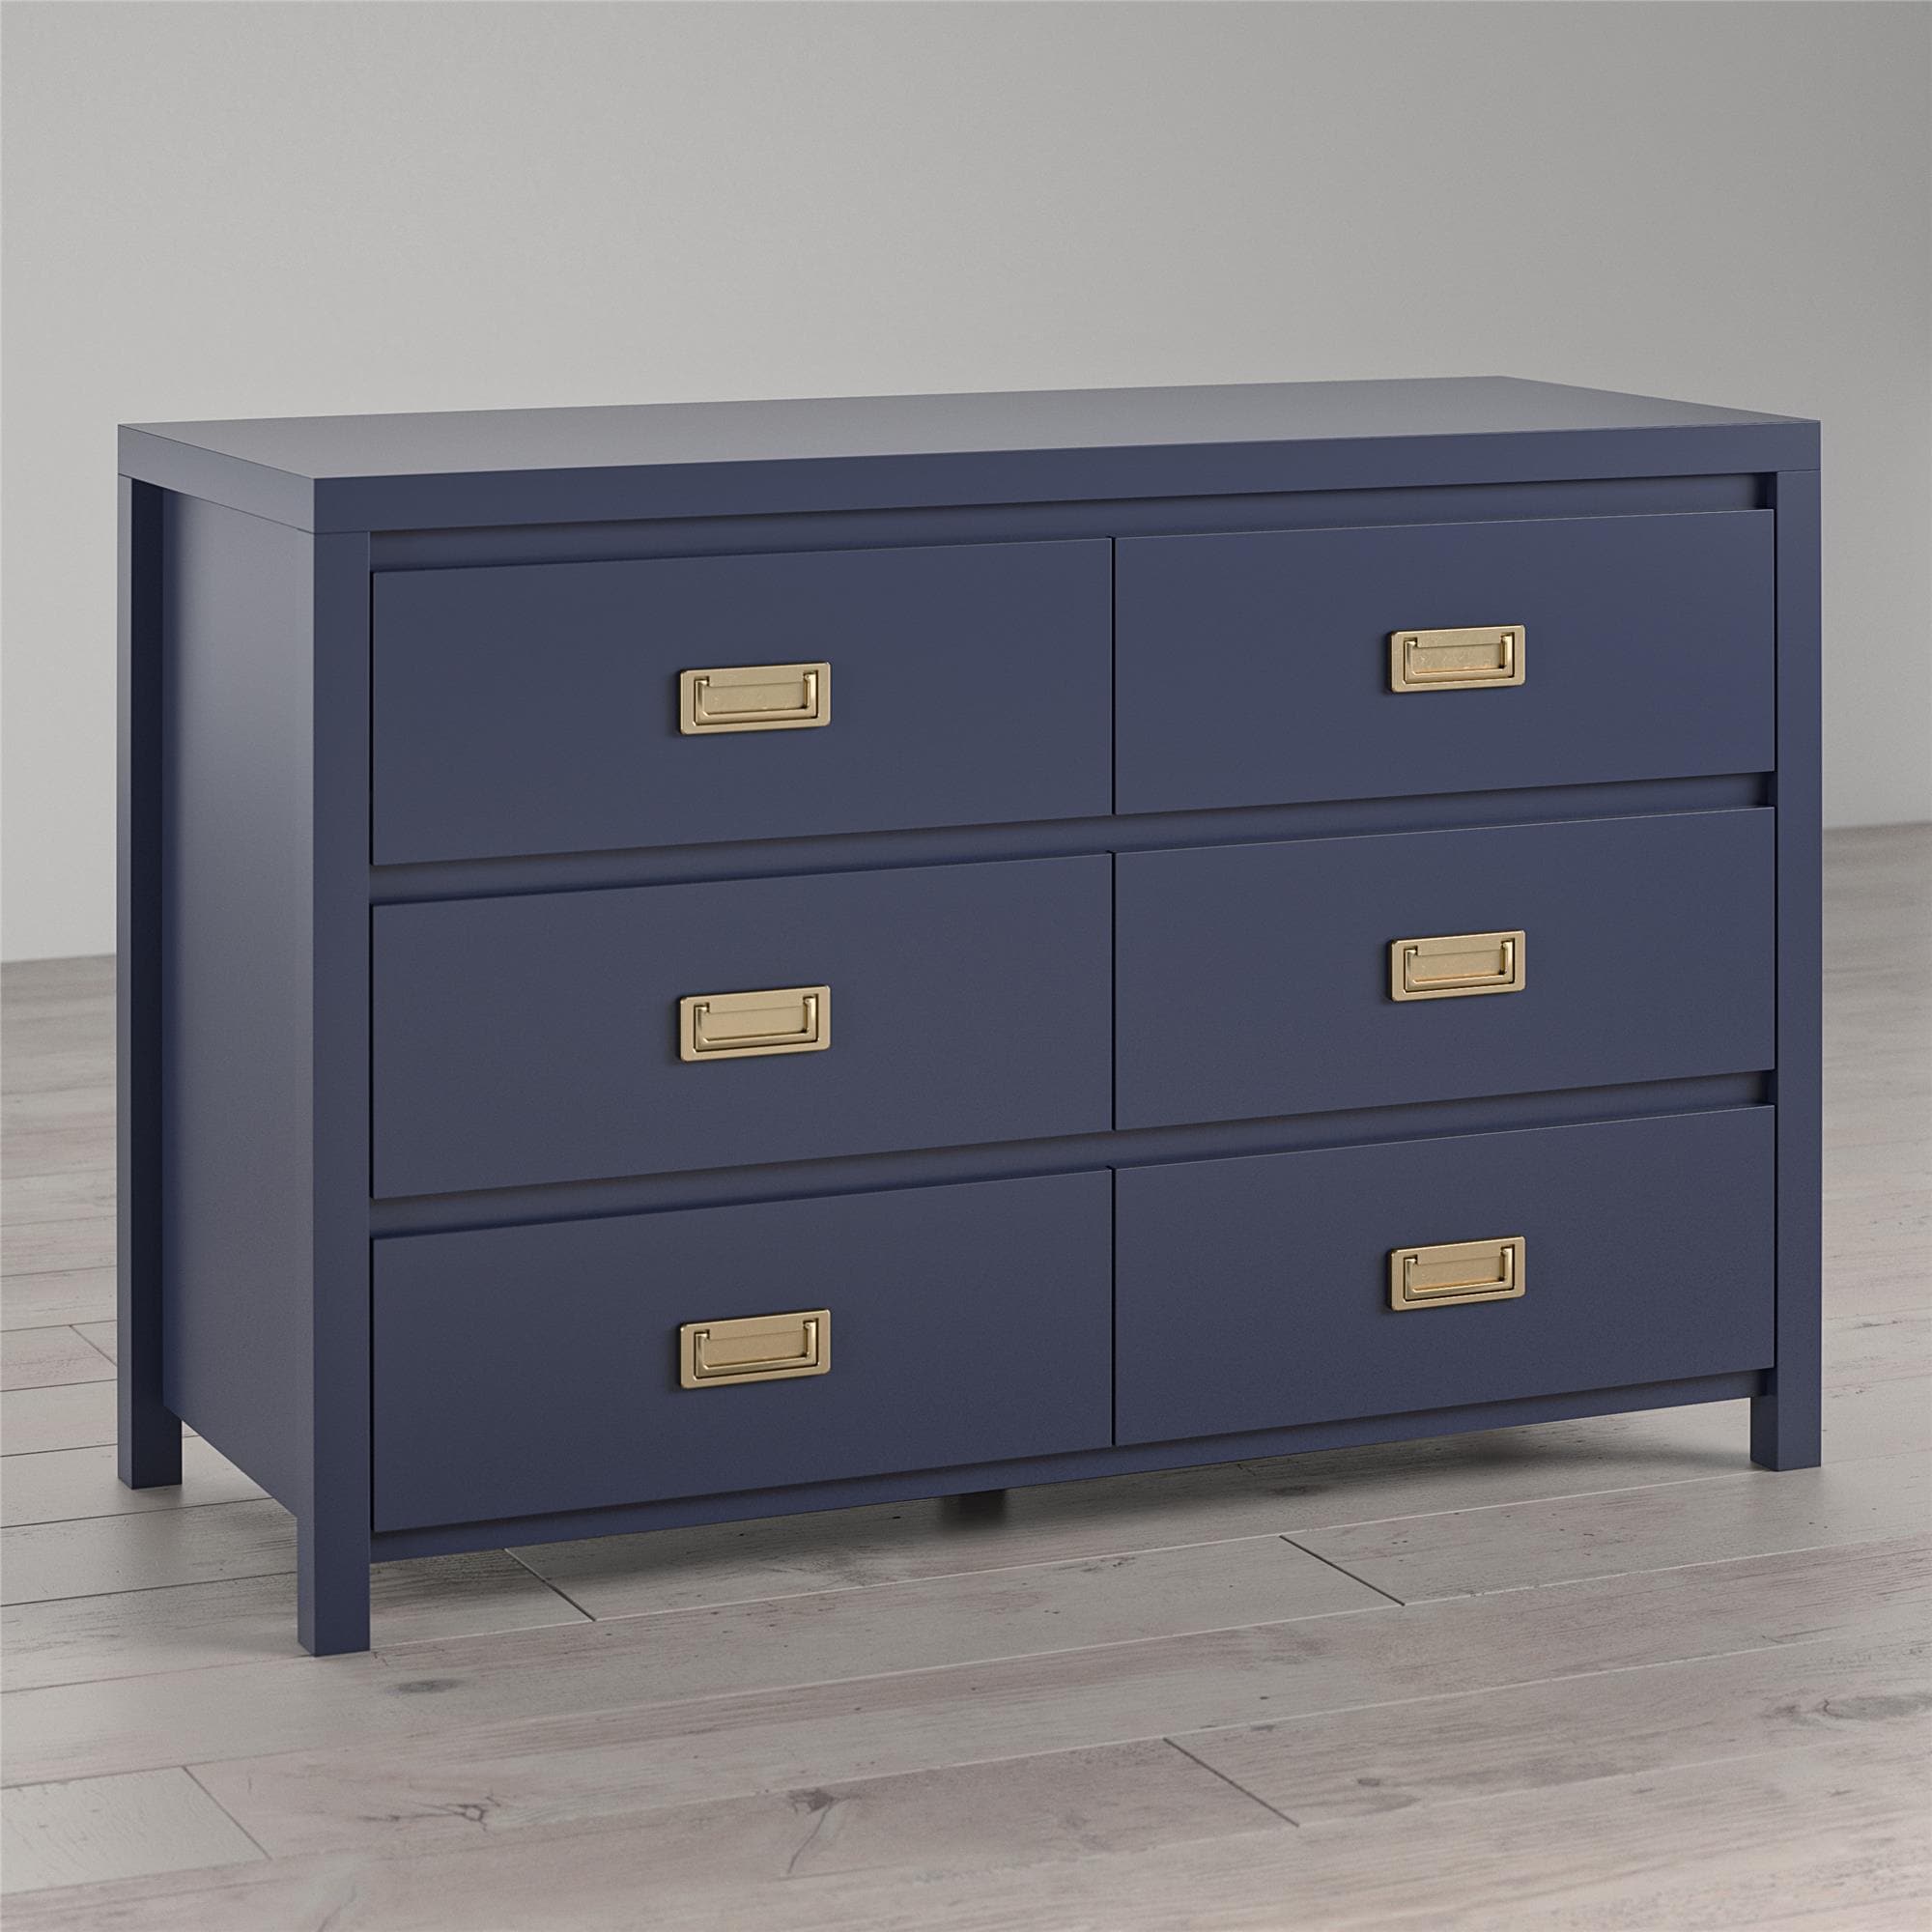 Traditional Style Navy Blue Storage Trunk Chairside Table With 2 Drawers  And Leather Trim